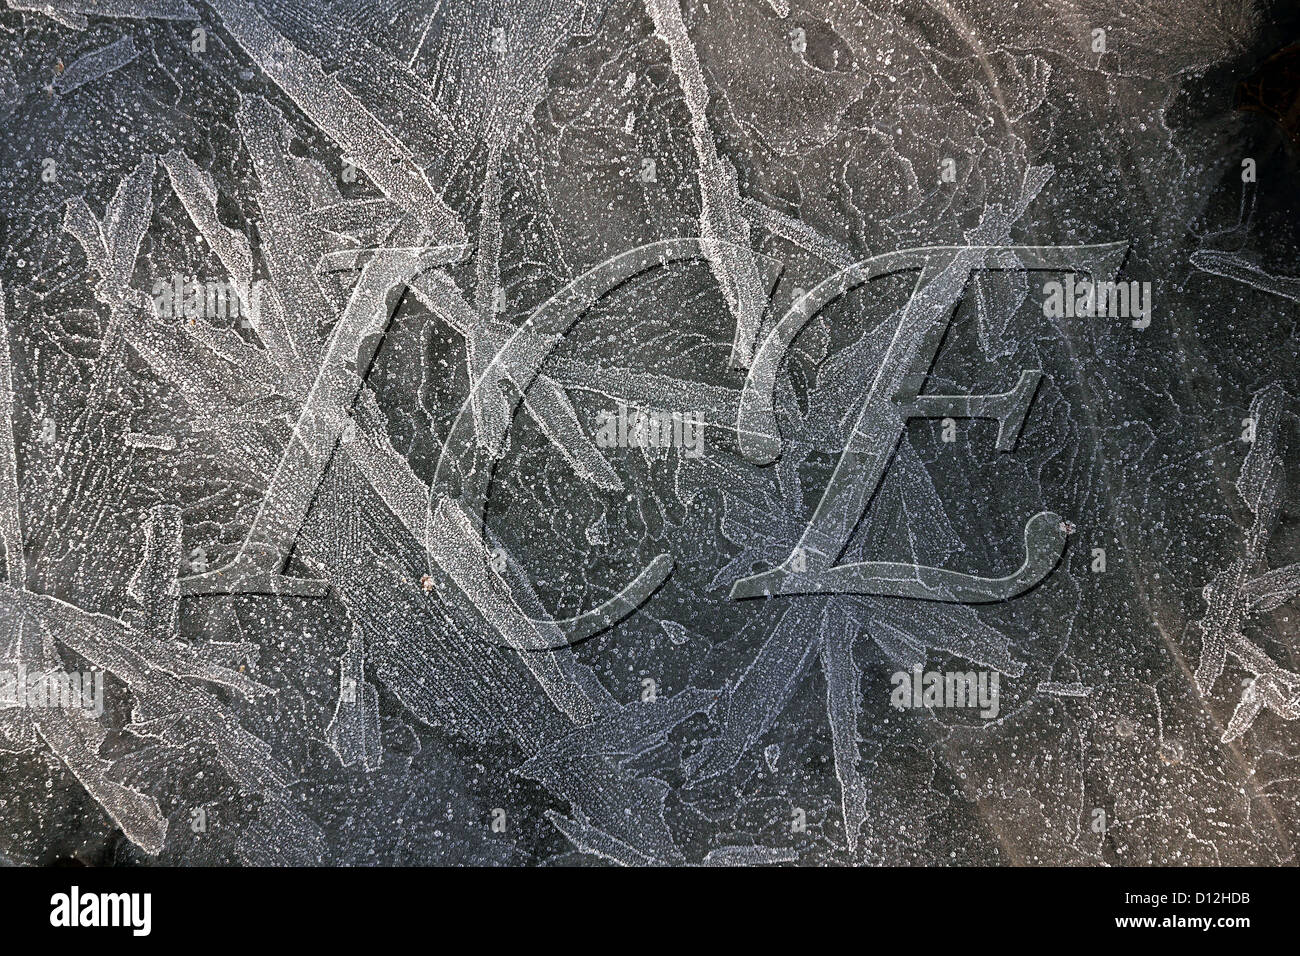 Hoar frost patterns on frozen puddle with embossed lettering added digitally, Leicestershire, UK Stock Photo